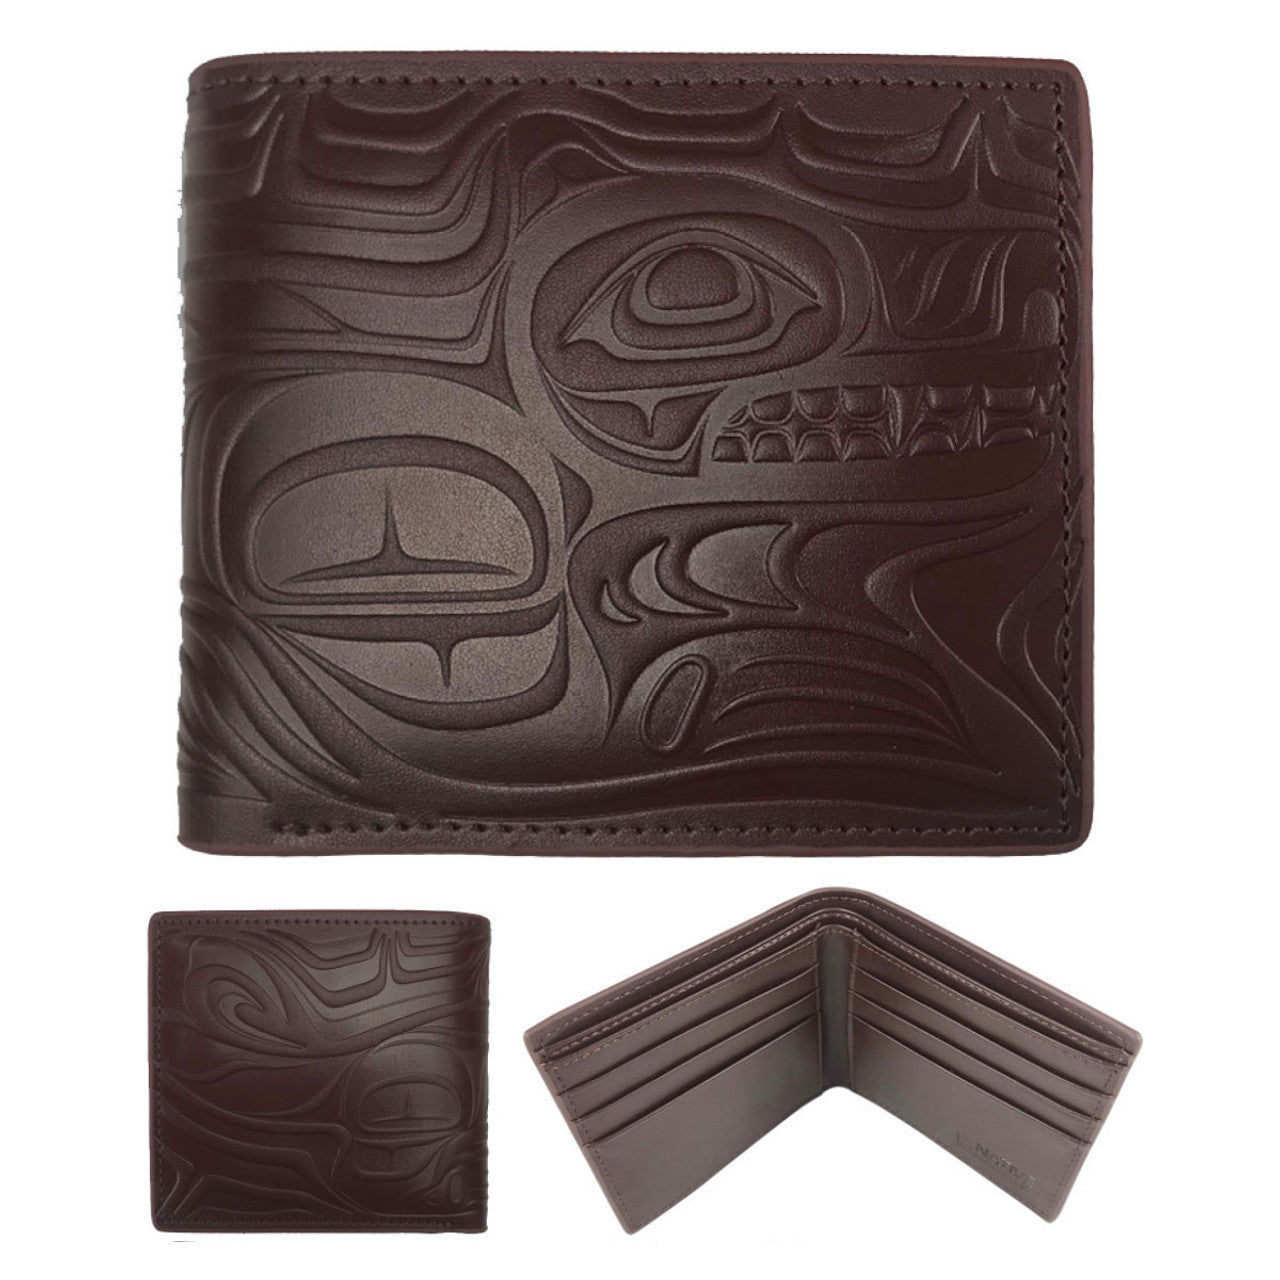 Leather Embossed Wallet - Wolf